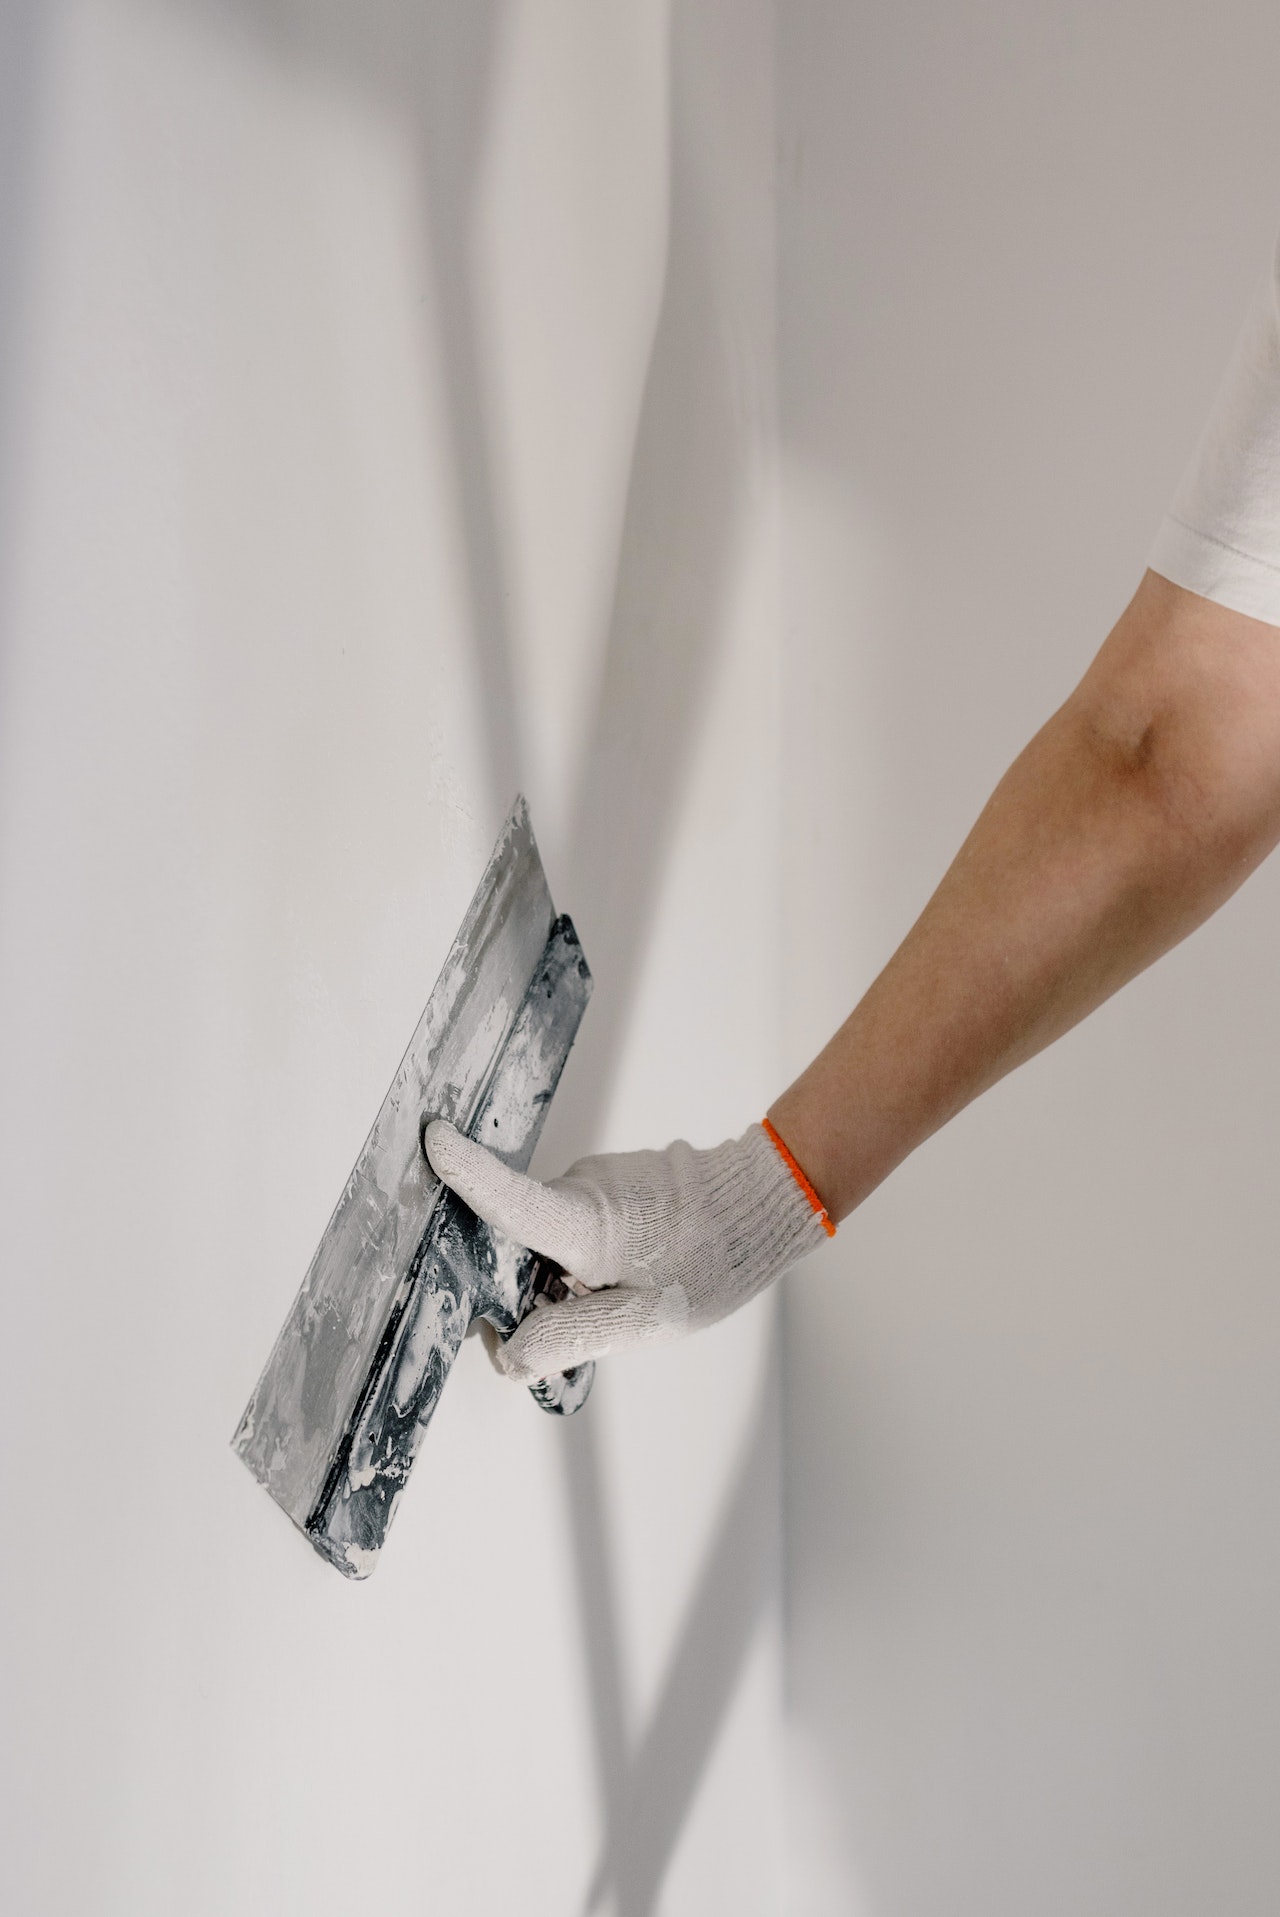 Top 5 Reasons Why Your Plastering Needs To Be Completed By A Professional